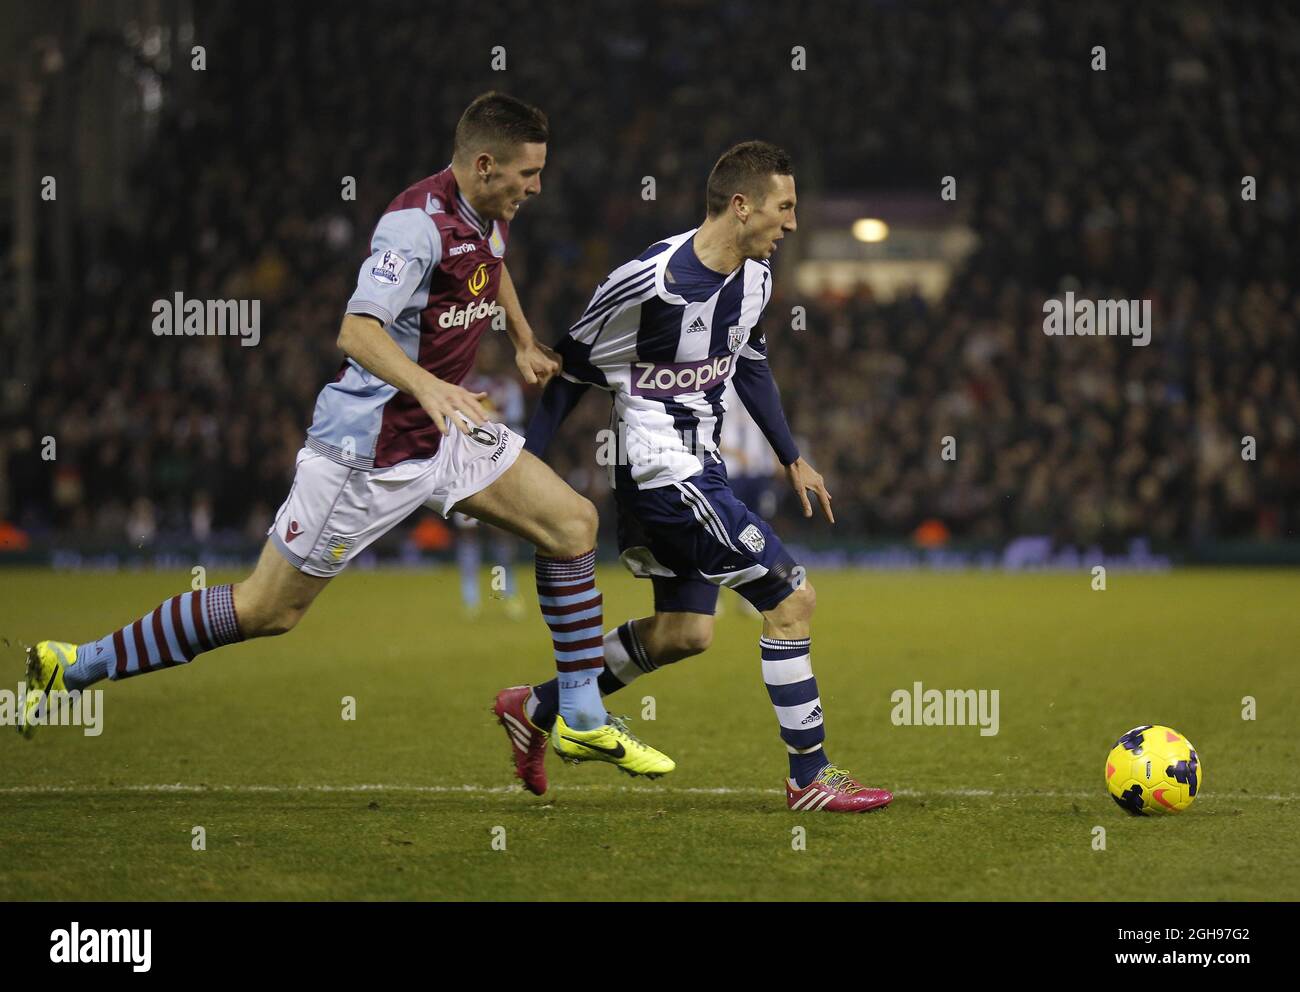 Morgan Amalfitano of West Brom goes past Ciaran Clark of Aston Villa during the Barclays Premier League match between West Bromwich Albion and Aston Villa in The Hawthorns, West Bromwich on November 25, 2013. Stock Photo